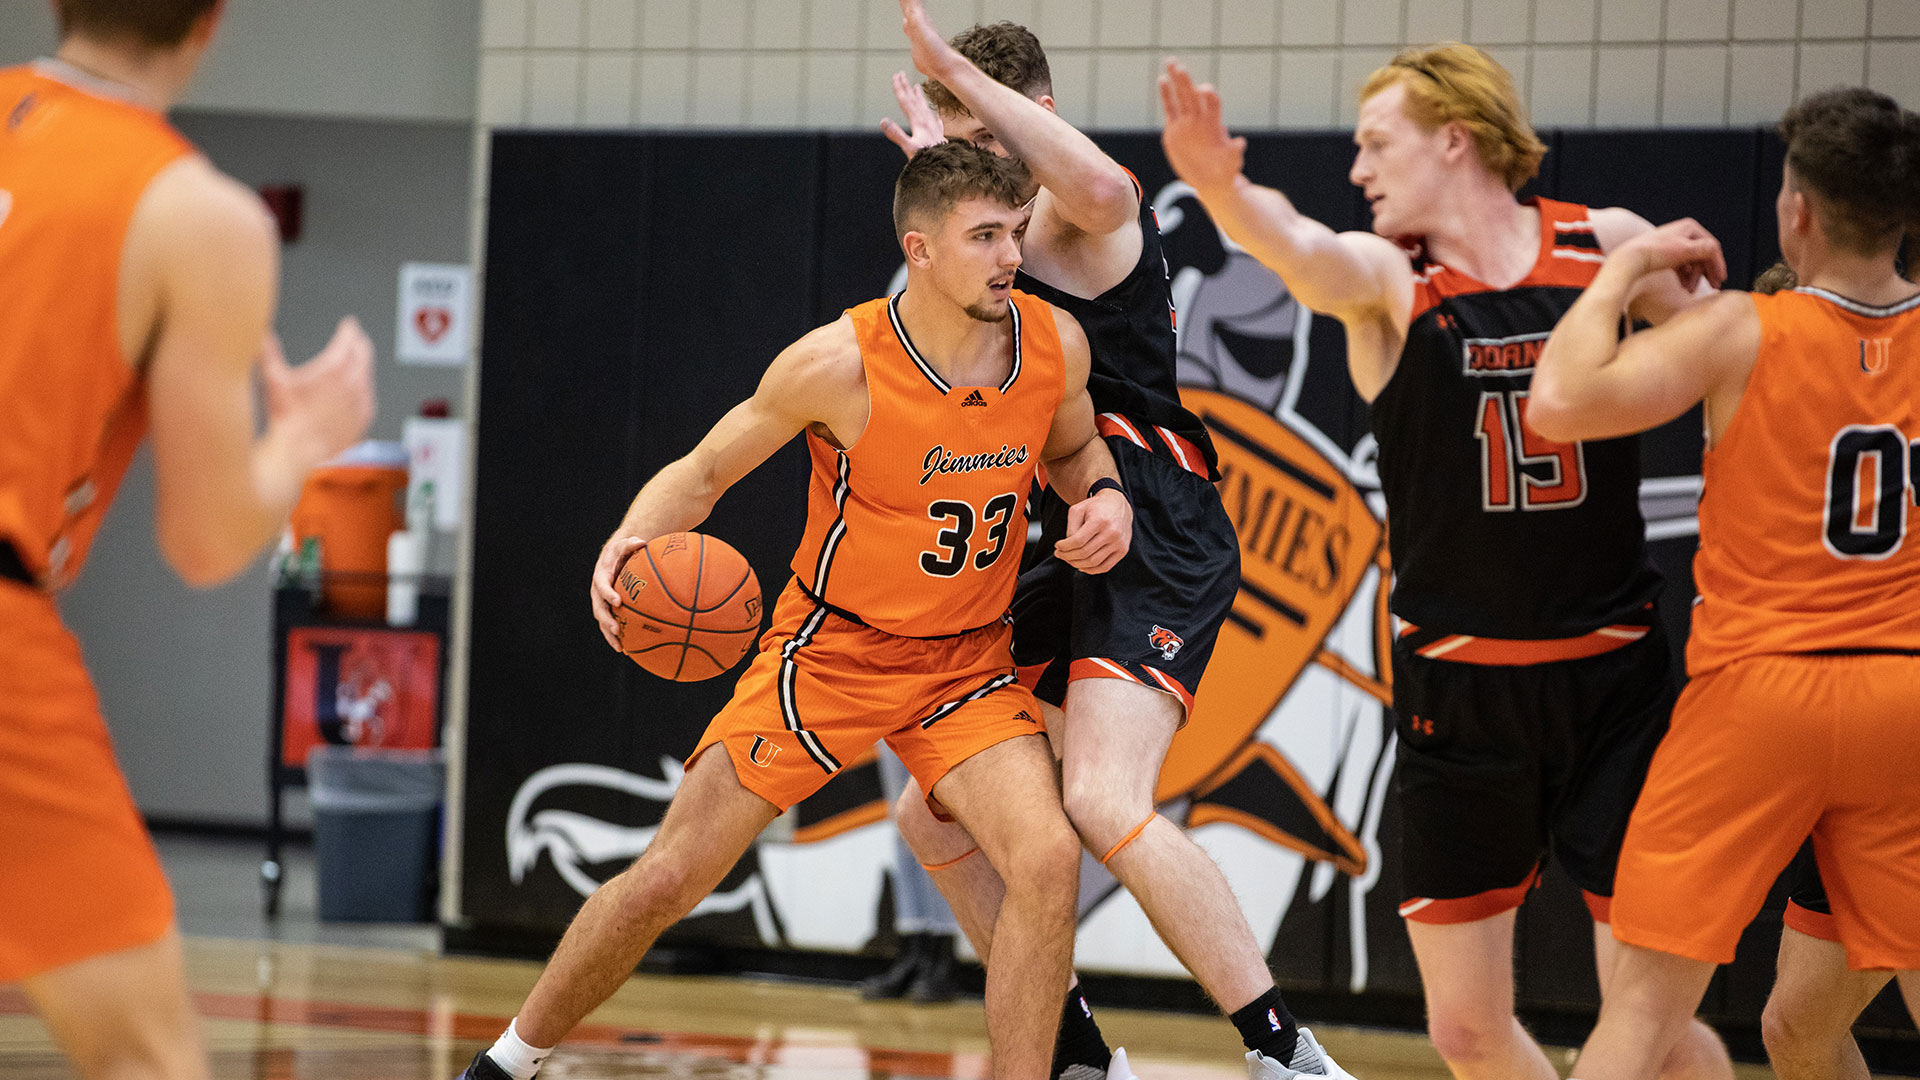 Walters and Gastner double-doubles help #6 UJ win at Mount Marty